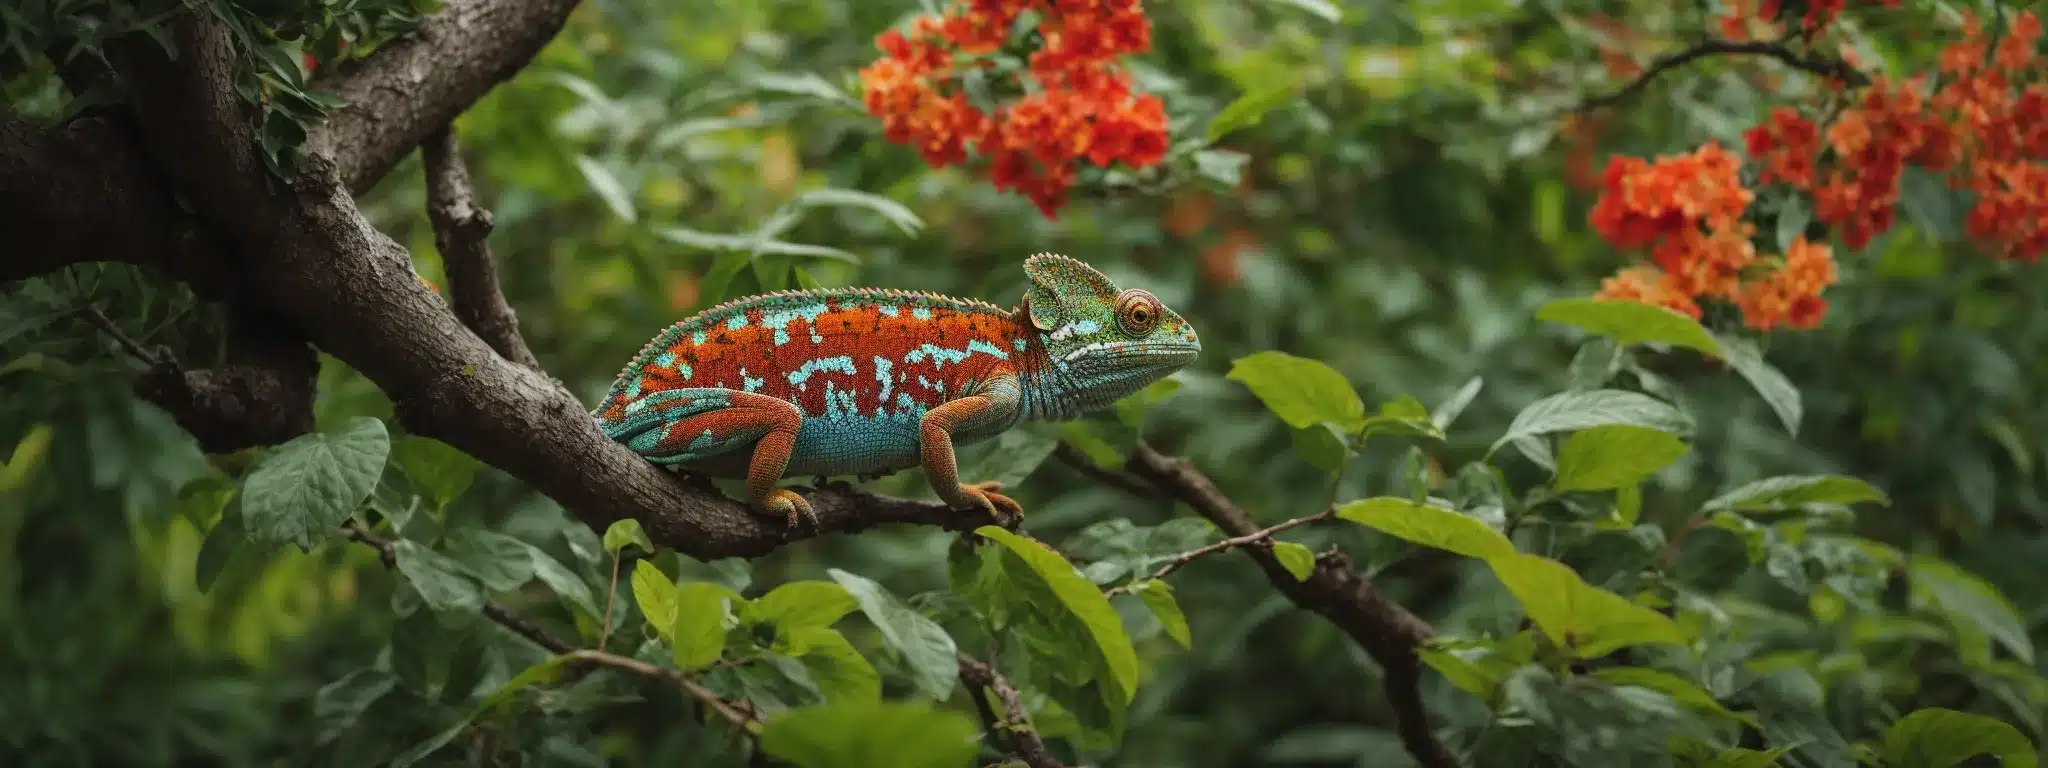 A Chameleon Perches On A Branch, Its Colors Blending With The Vibrant, Changing Scenery Of A Lush Garden.